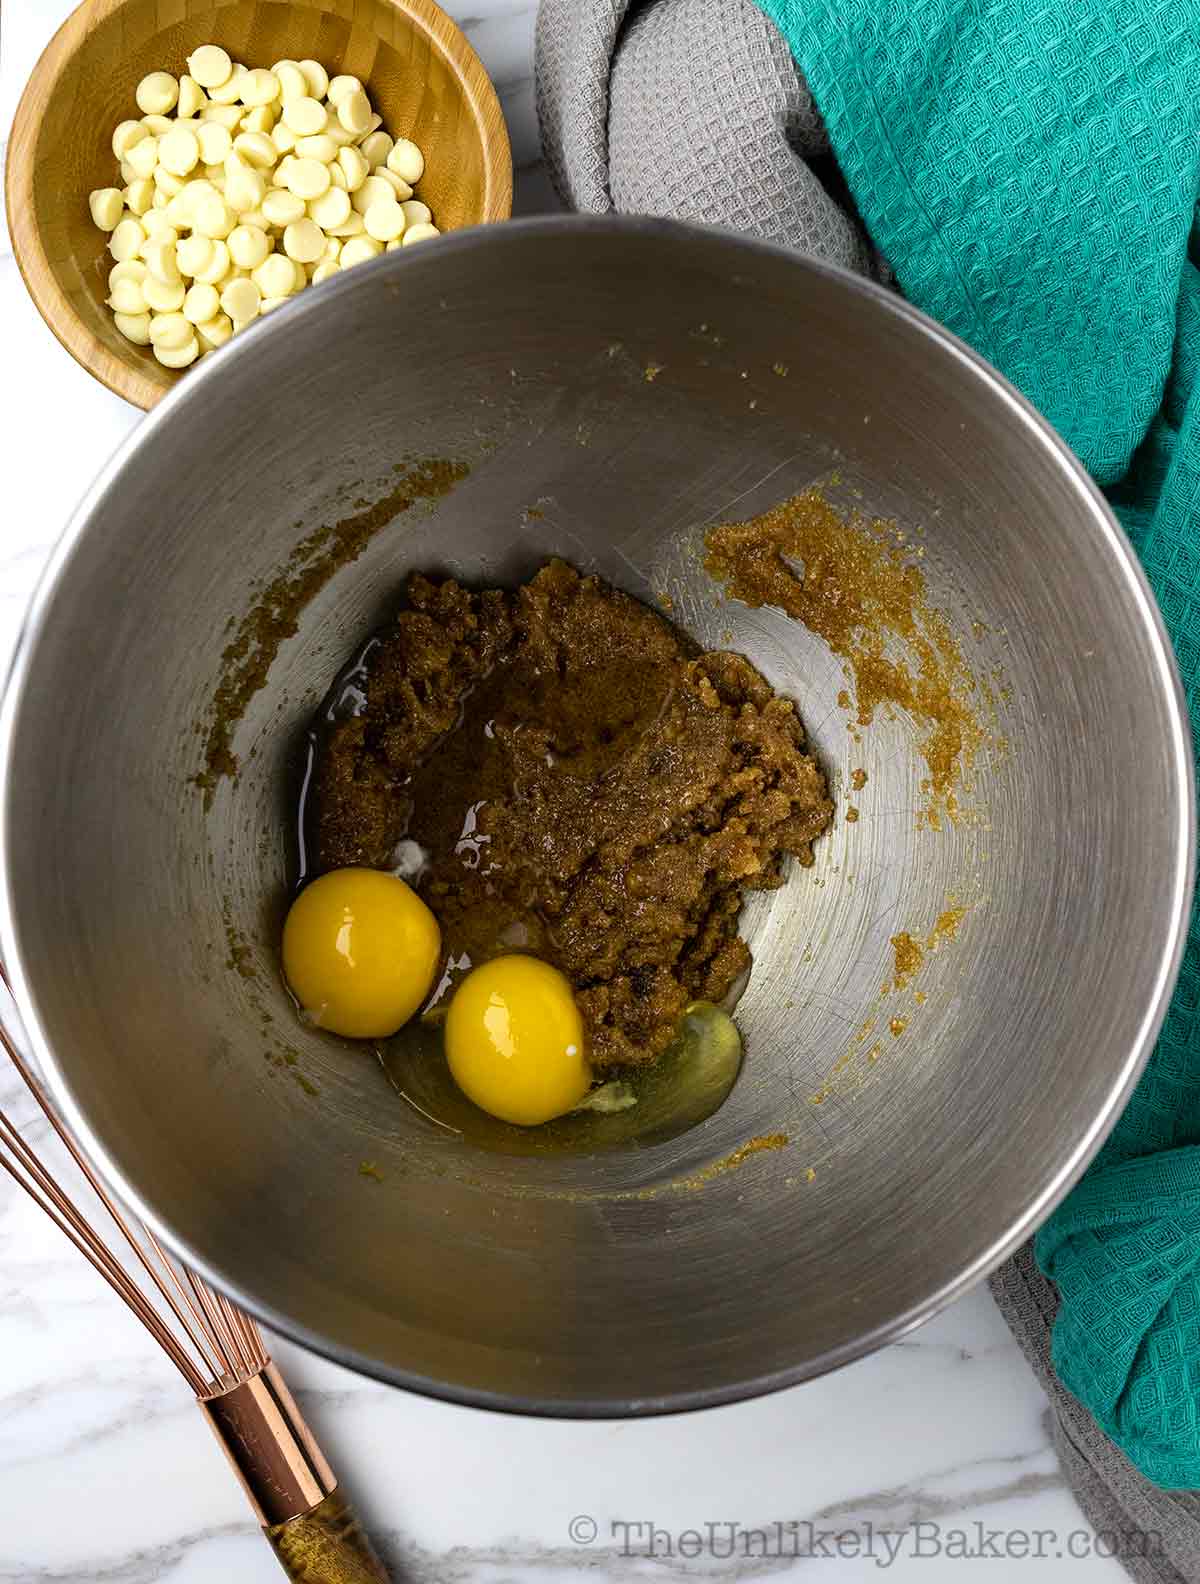 Eggs added to brown sugar mixture.